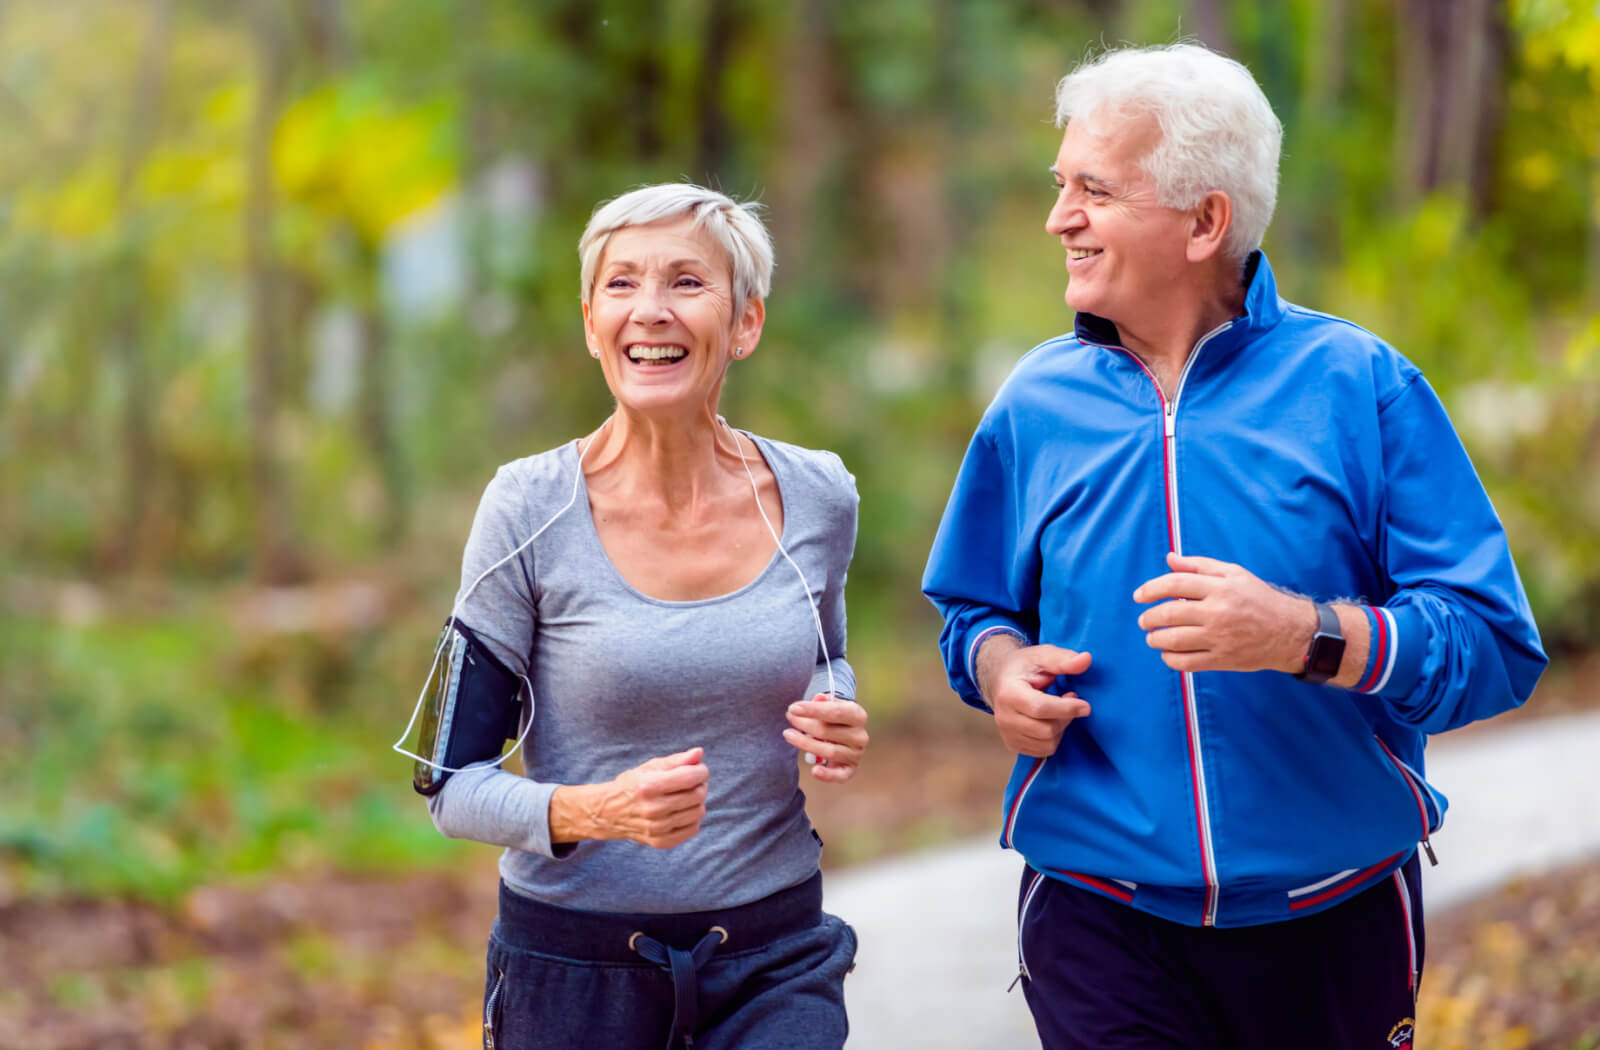 A senior woman and a senior man smiling while jogging in a park.